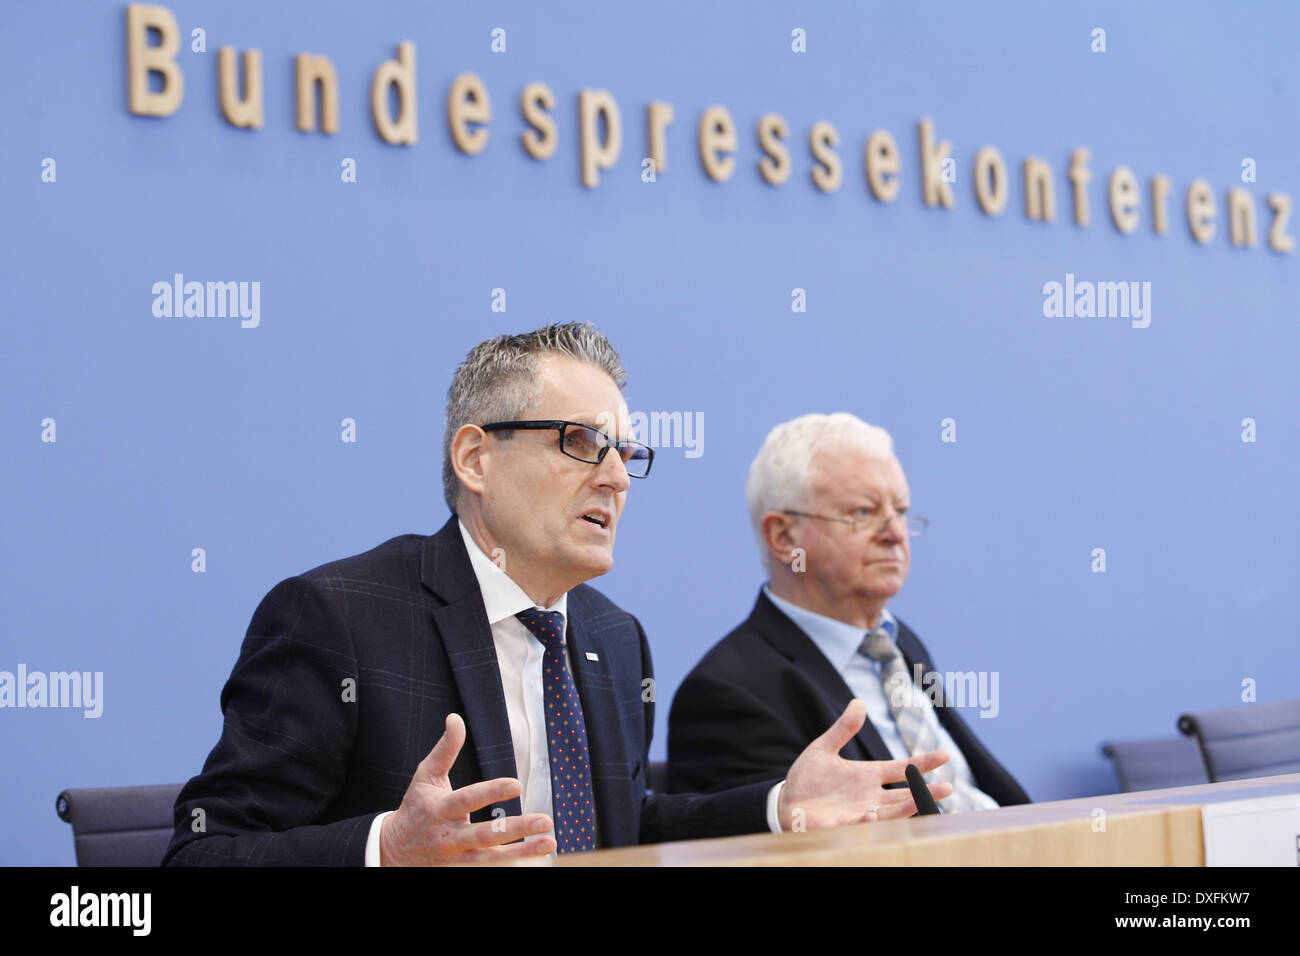 Berlin, Germany. 25th Mar, 2014. Press conference with president of German Red Cross, Seiters, team leader public welfare and social engagement of the German Red Cross, Betz, and the consultant, Bibisidis on the subject ''50 years voluntary social year. Figures and facts as well as political demands to the future of the volunteer's services in Germany'' at House of the German press conference in Berlin./Picture: Matthias Betz, team leader public welfare and social engagement of the German Red Cross, speaking aside Dr. Rudolf Seiters, president of the German Red Cross. (Credit Image: © Rey Stock Photo